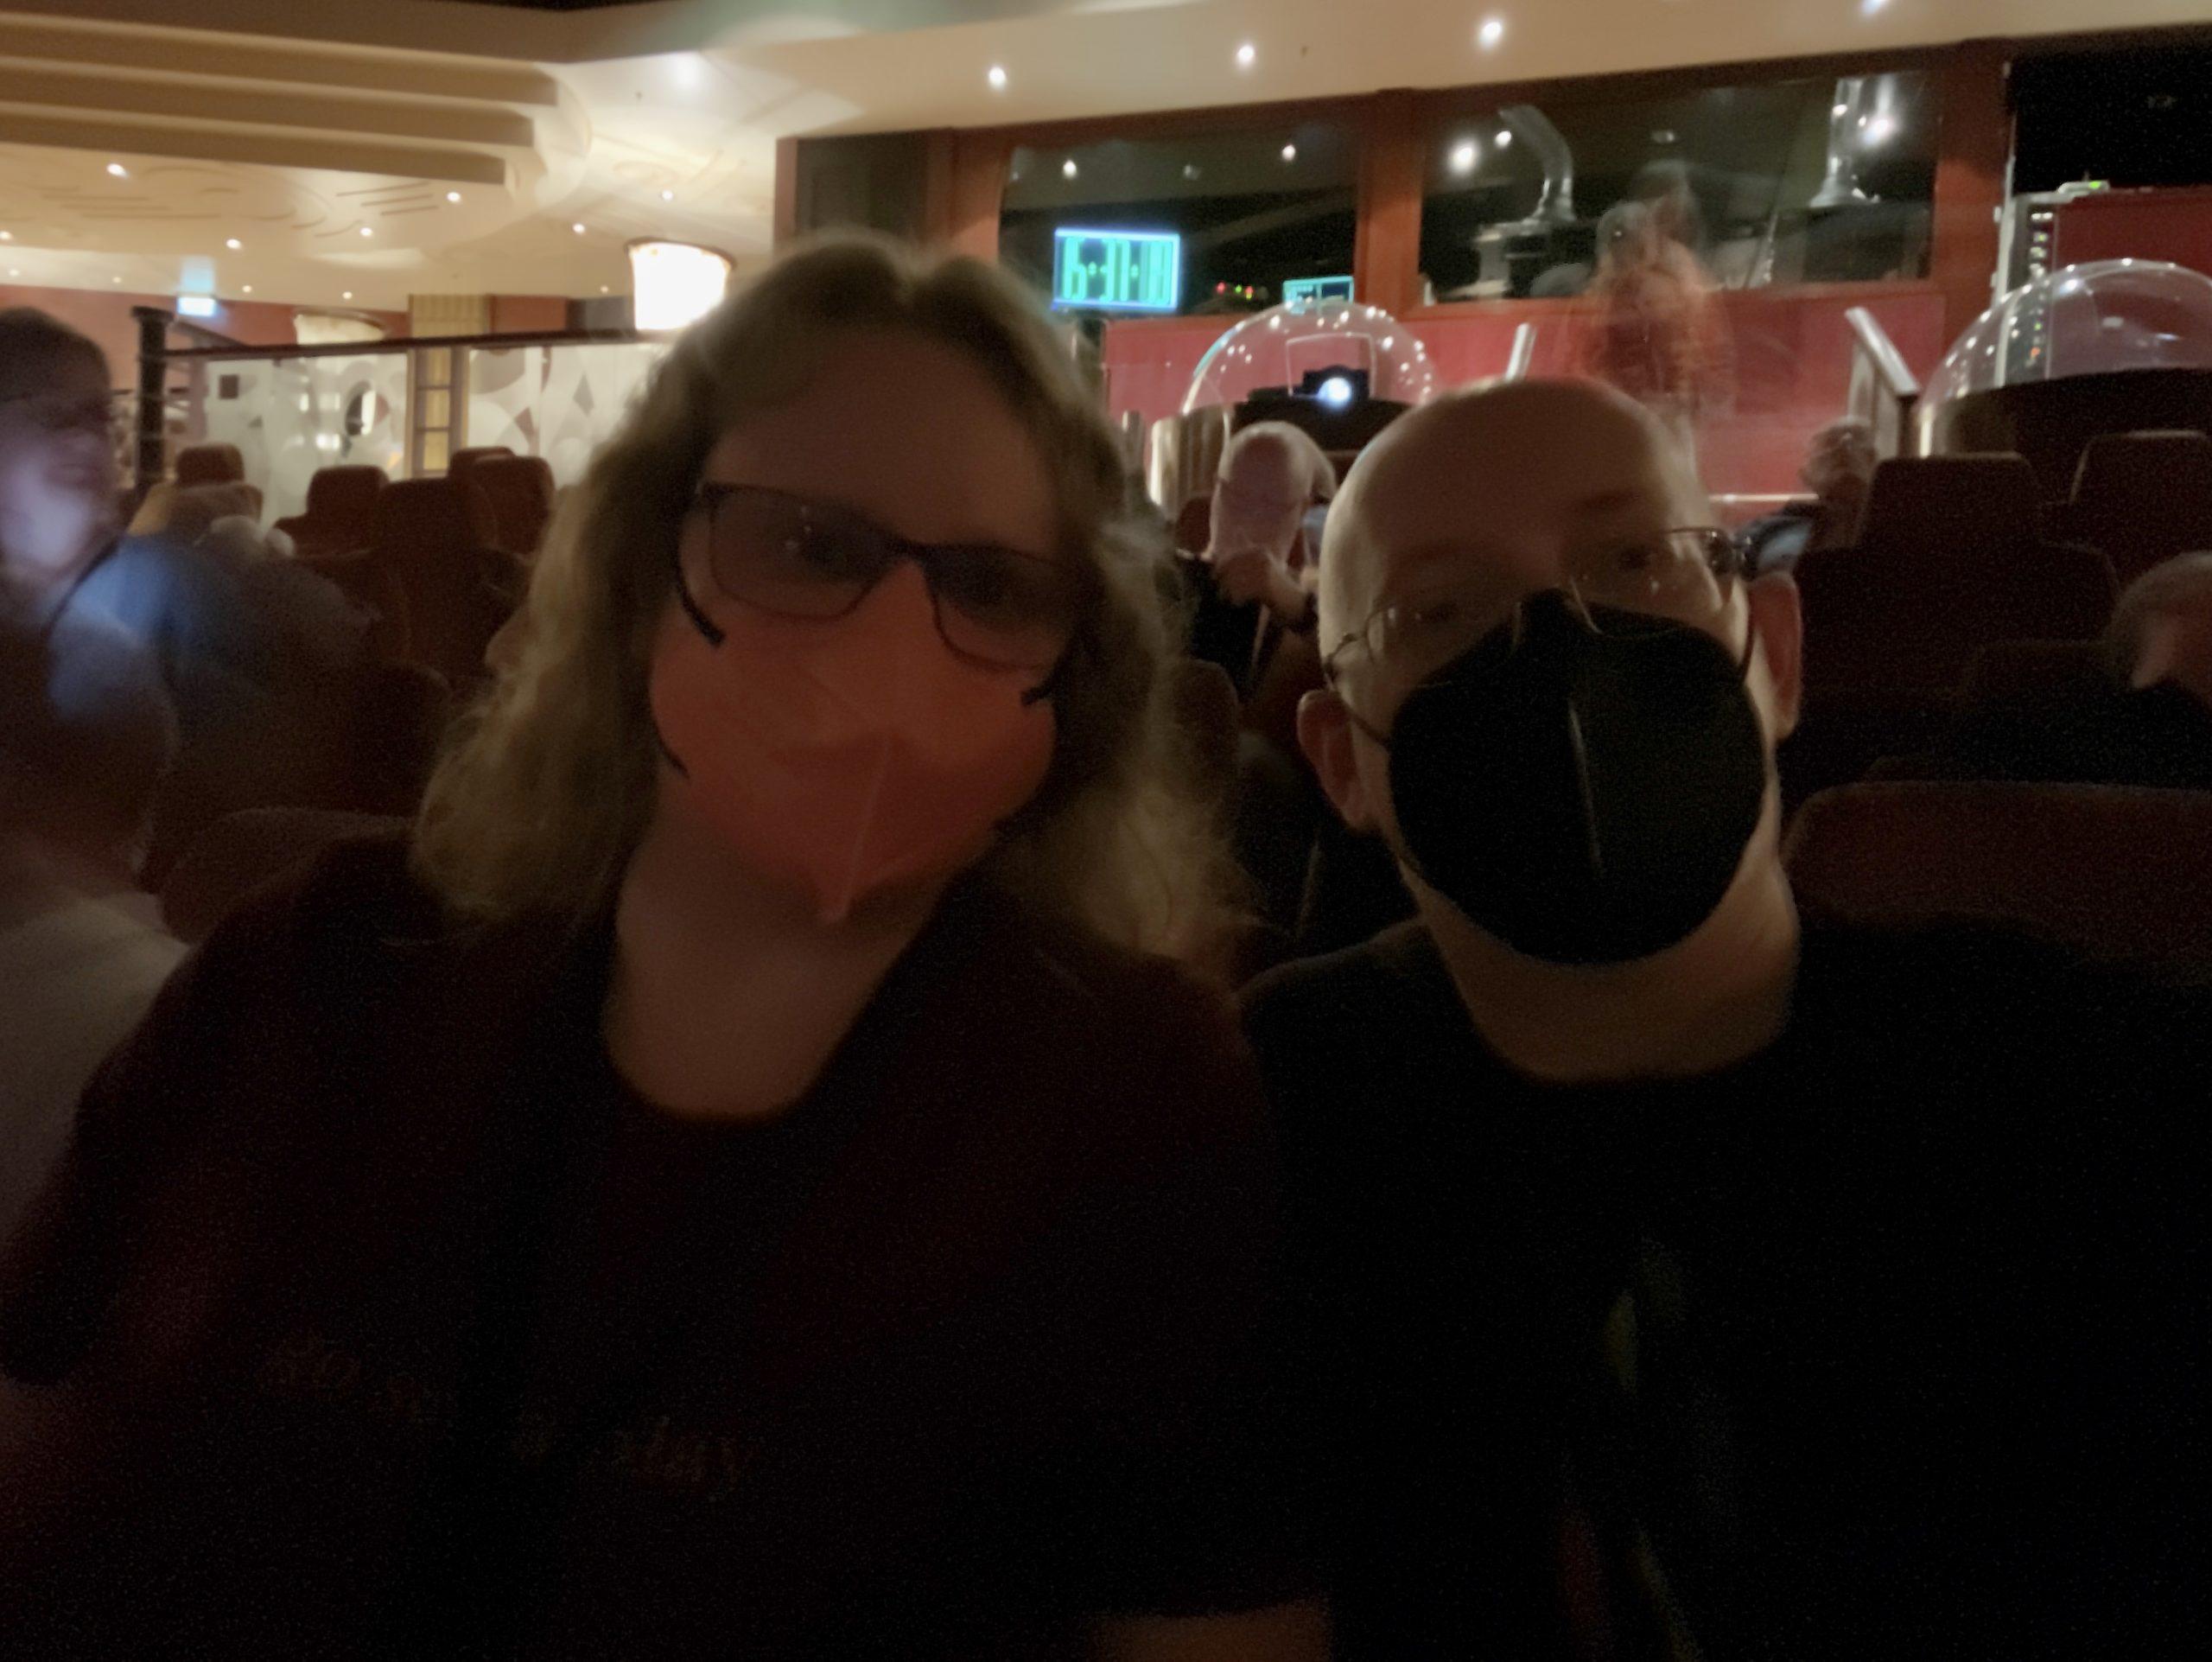 A dark photo of my wife and I, both wearing masks, sitting in auditorium seats. People around us are half-visible and blurred due to the long exposure.